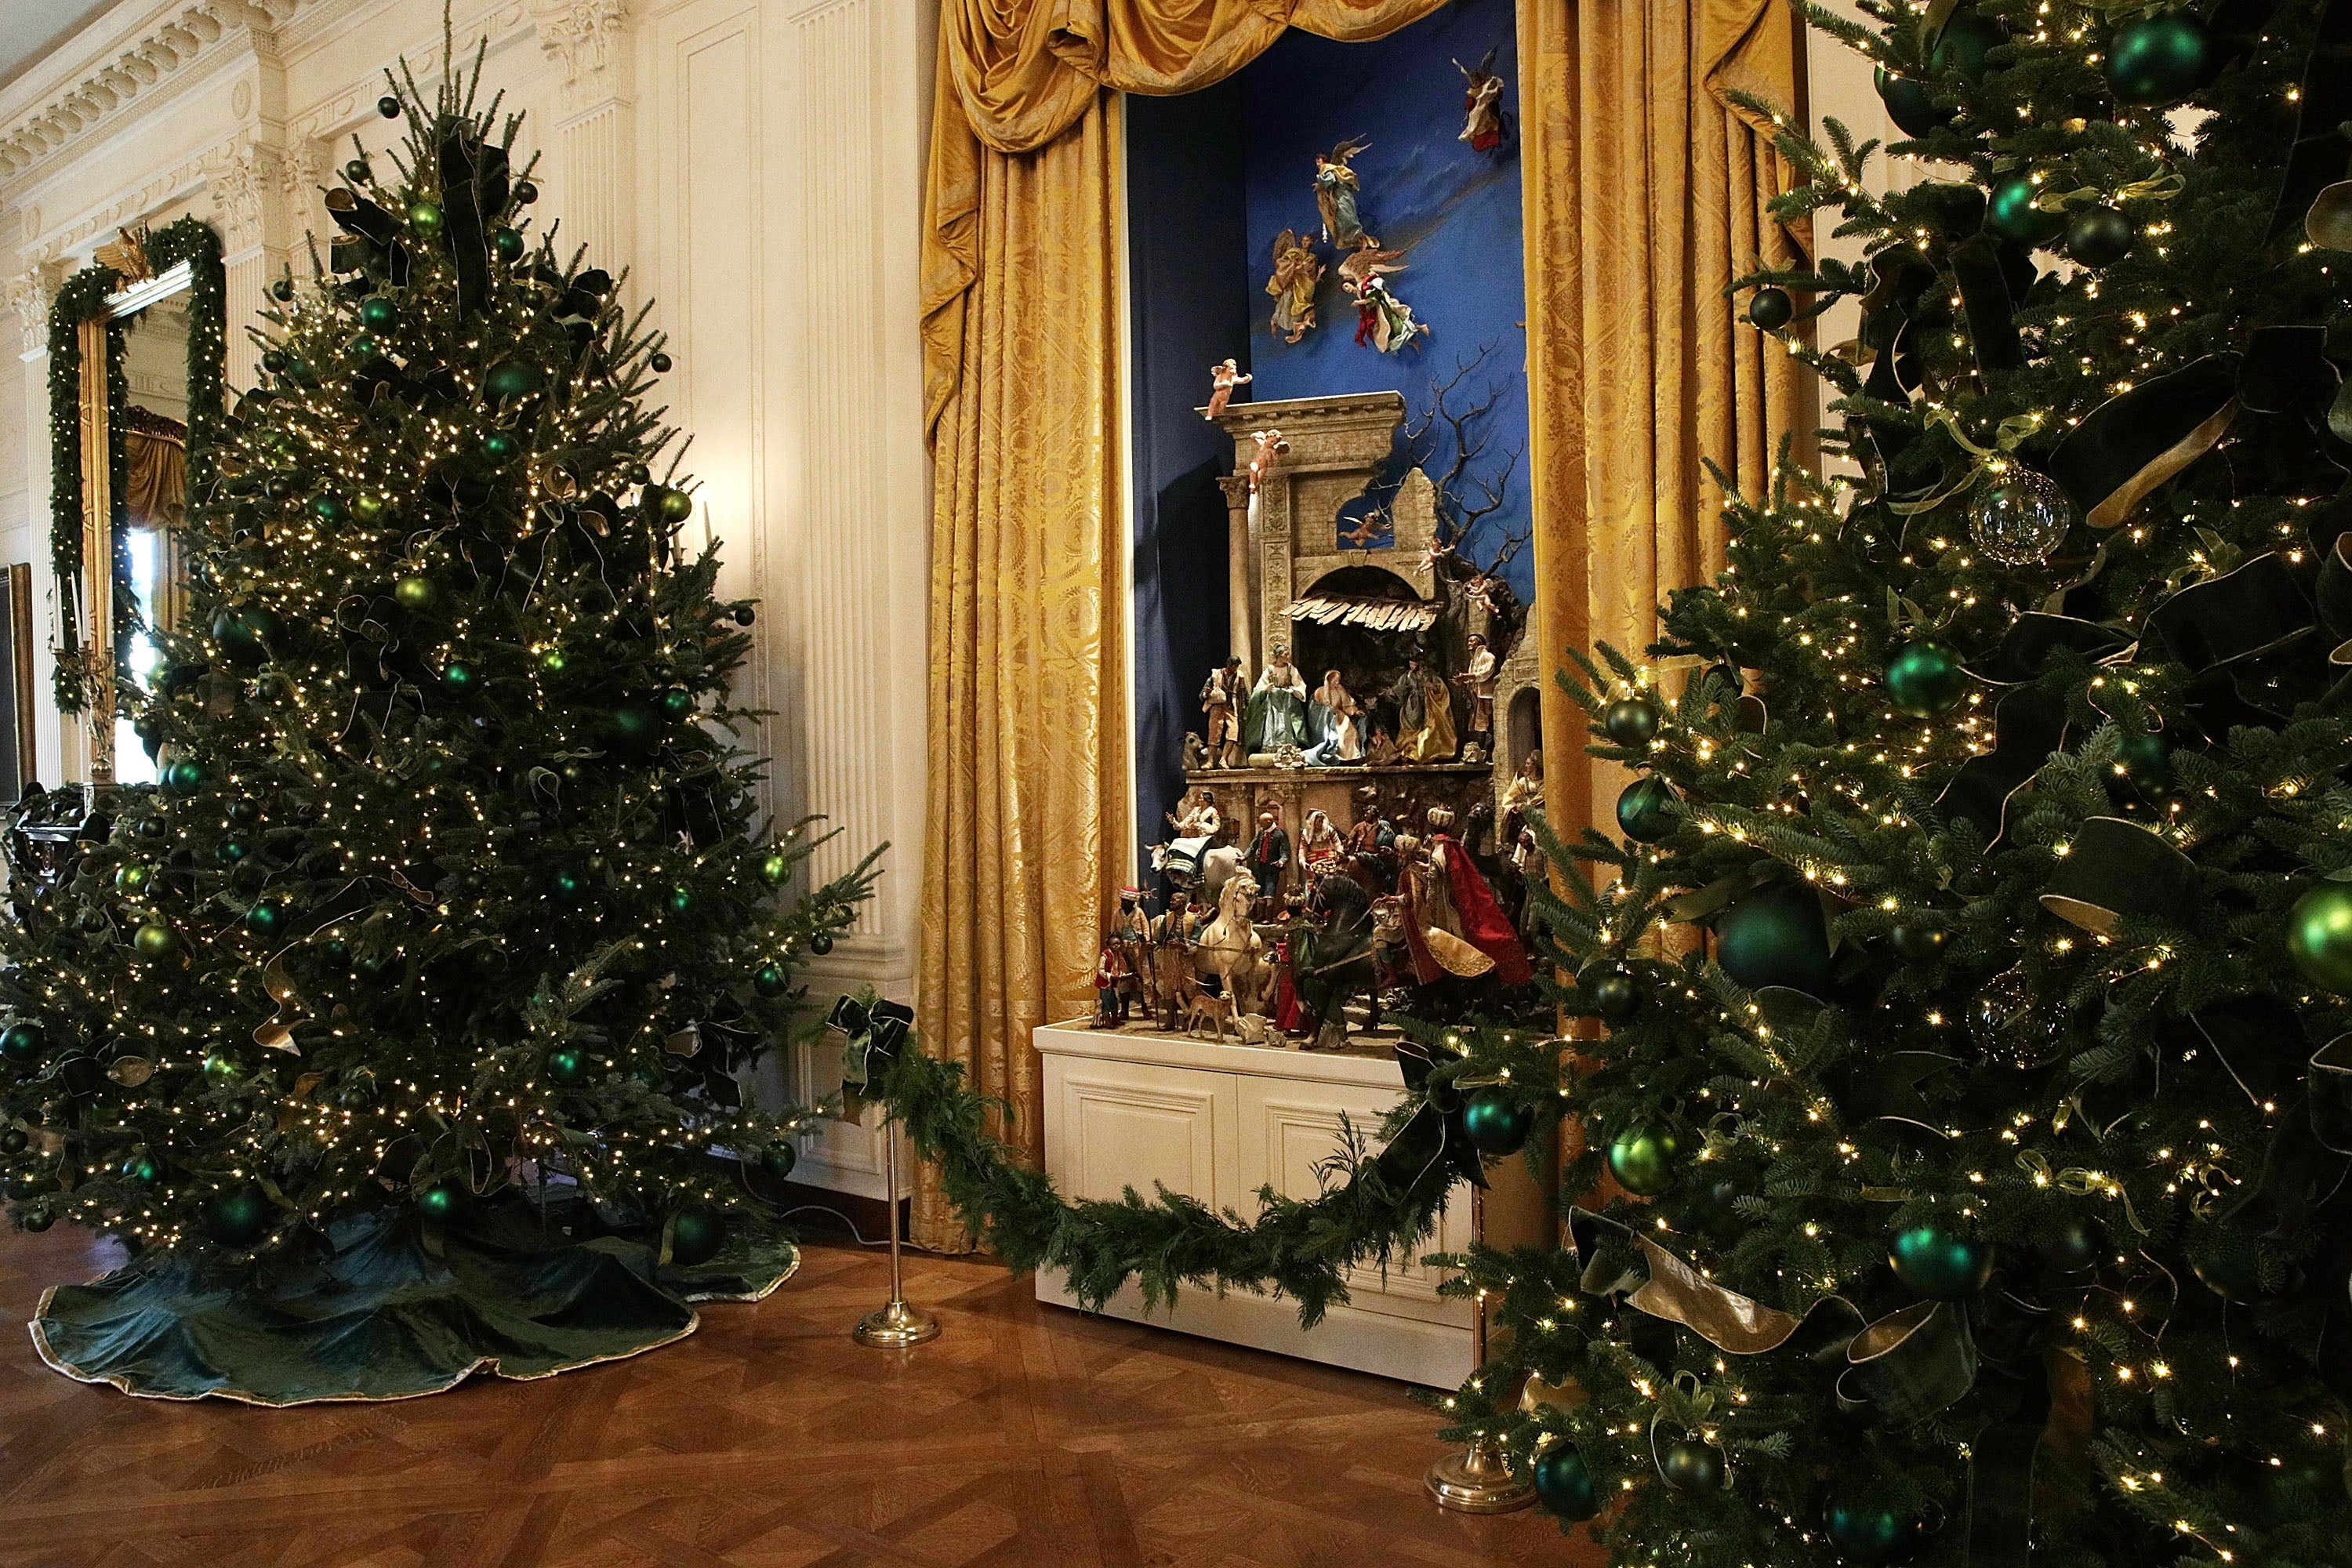 The White House creche has been on display since 1967